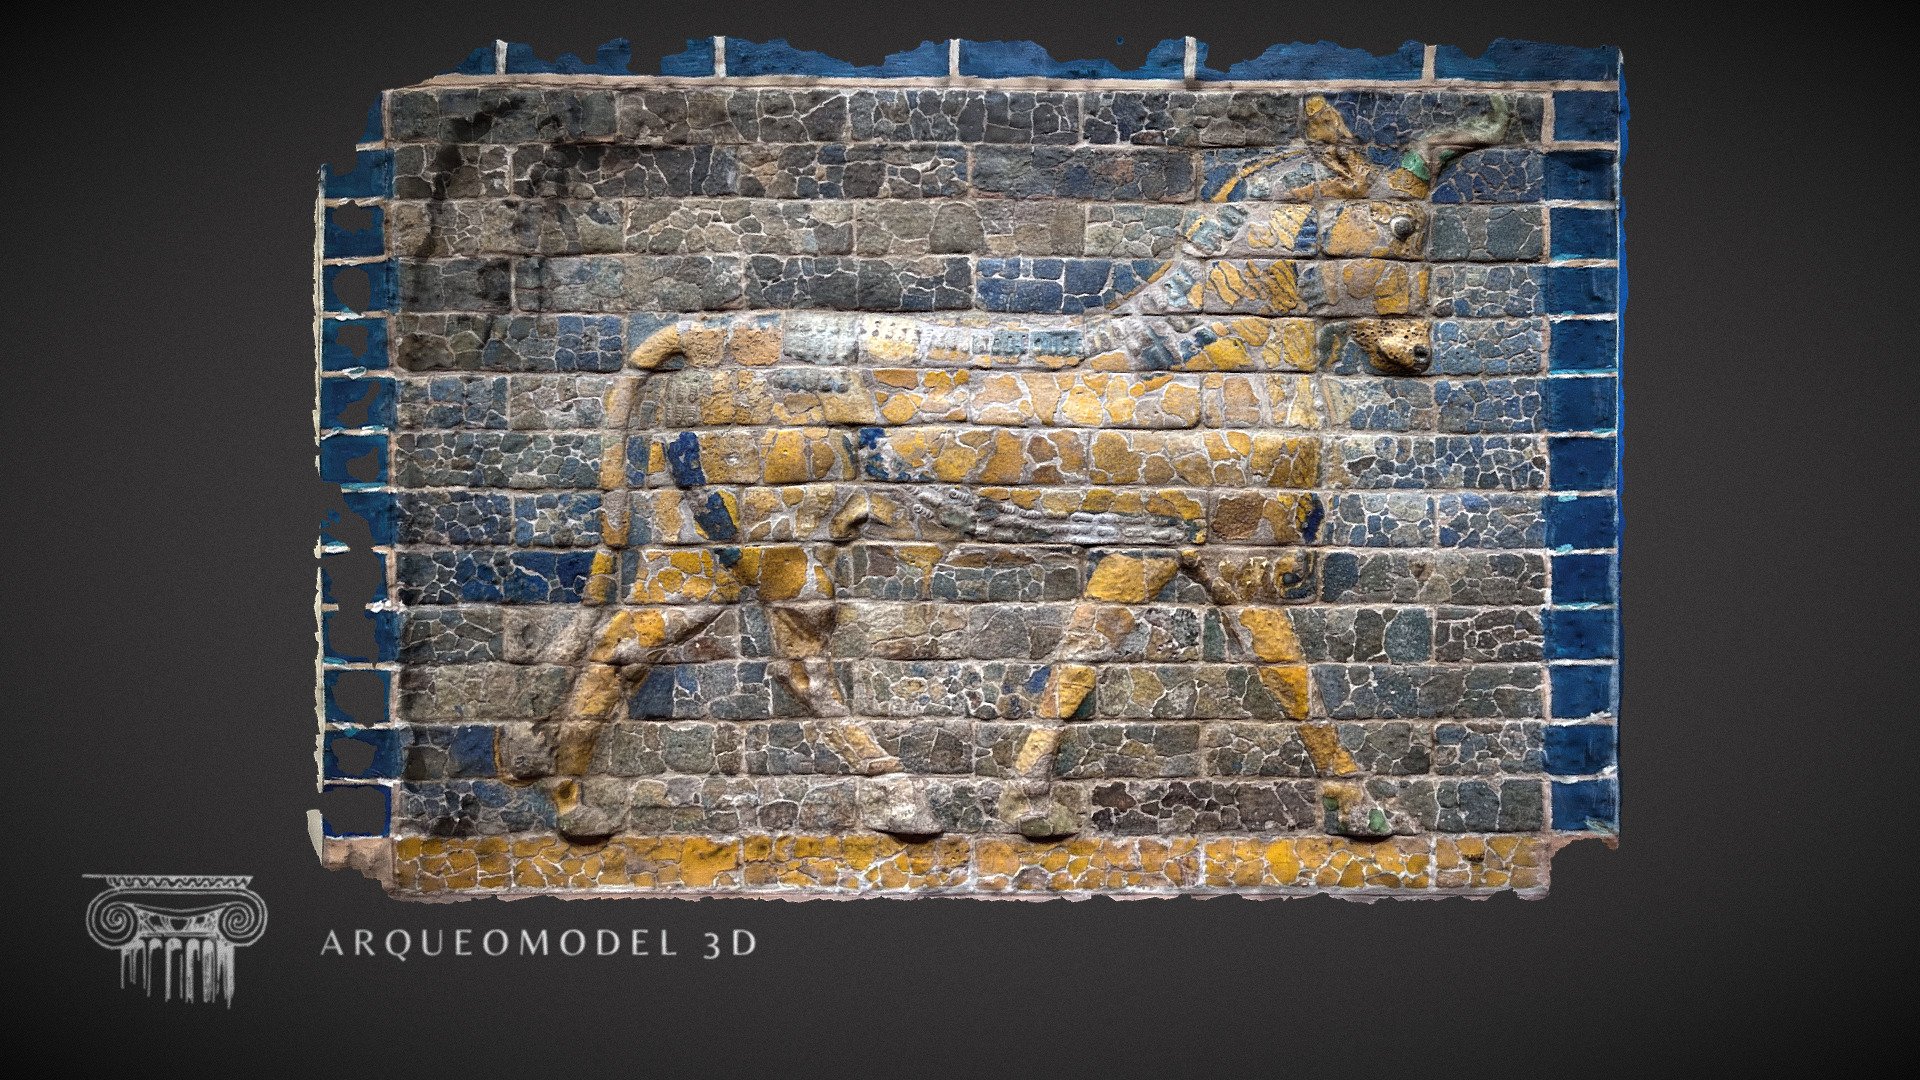 Animal symbol from Ishtar Gate from ancient Babylon city at the Iraqi national museum in Baghdad, capital city of Iraq - Animal Ishtar Gate | IRAQ - Buy Royalty Free 3D model by Arqueomodel3D (@juanbrualla) 3d model